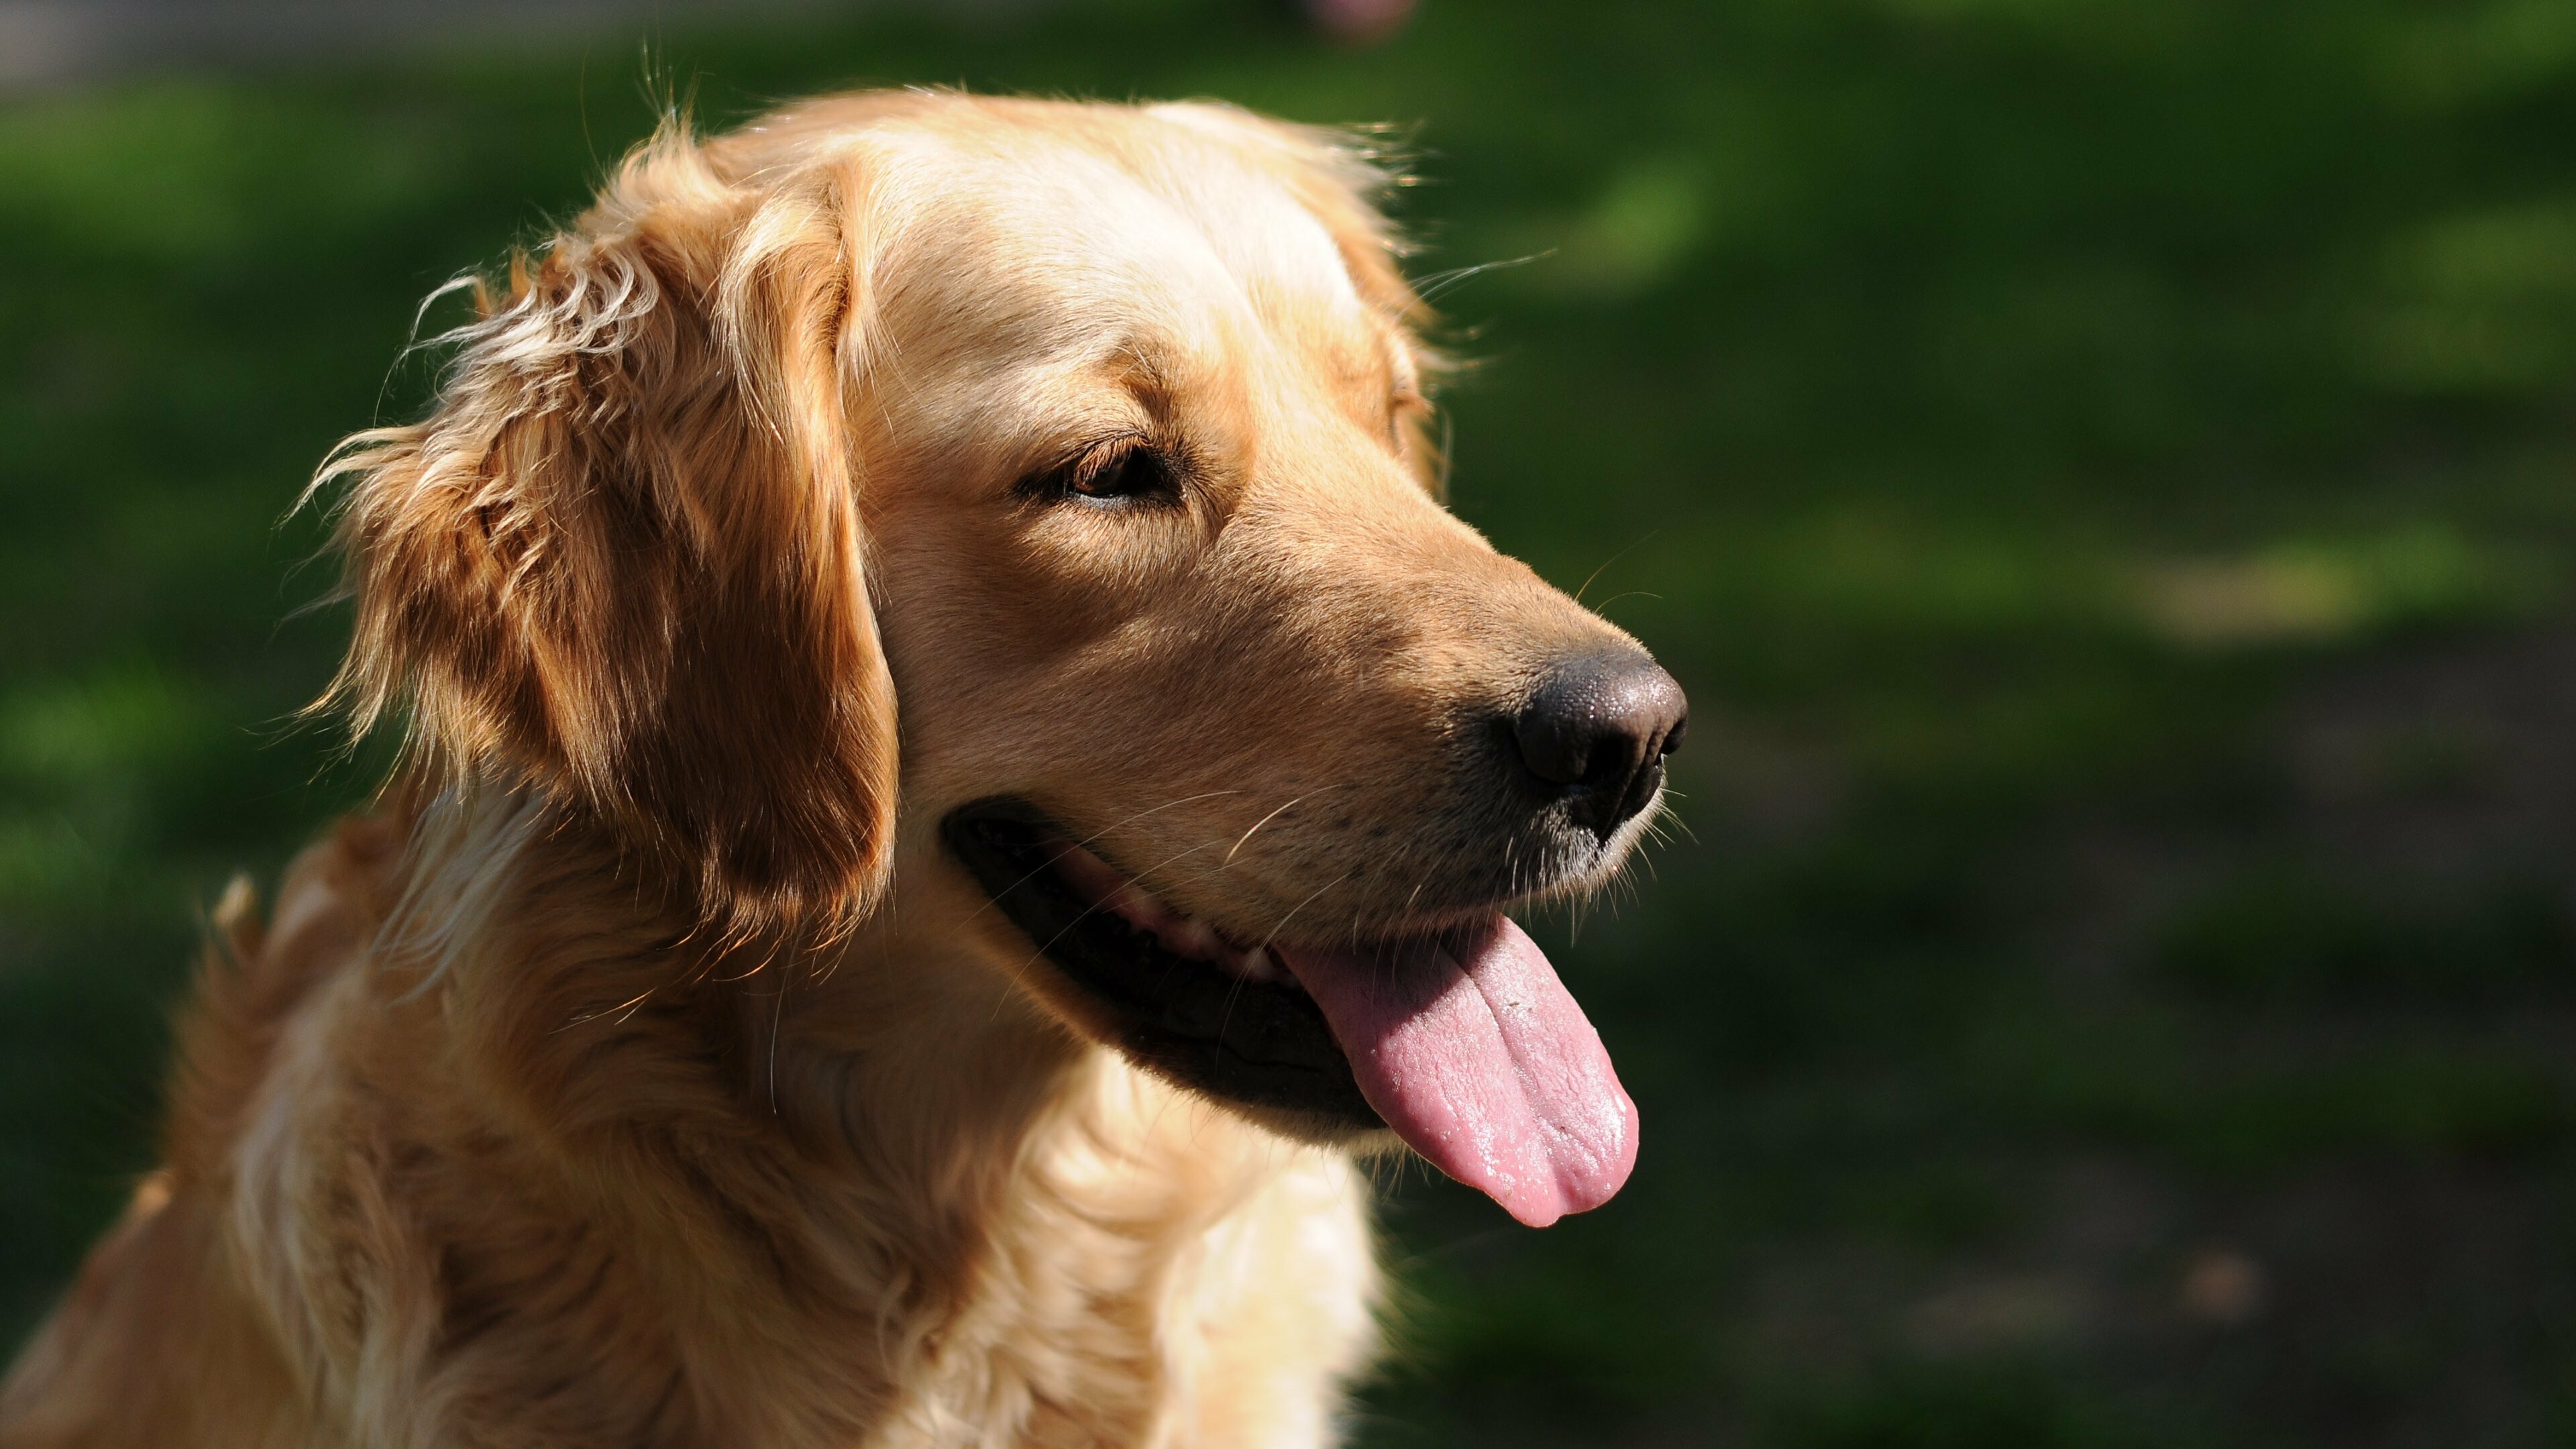 Golden Retriever: Serious workers at hunting and field work, as guides for the blind, and in search-and-rescue, Enjoy obedience and other competitive events, and have an endearing love of life when not at work, Pet. 3840x2160 4K Wallpaper.